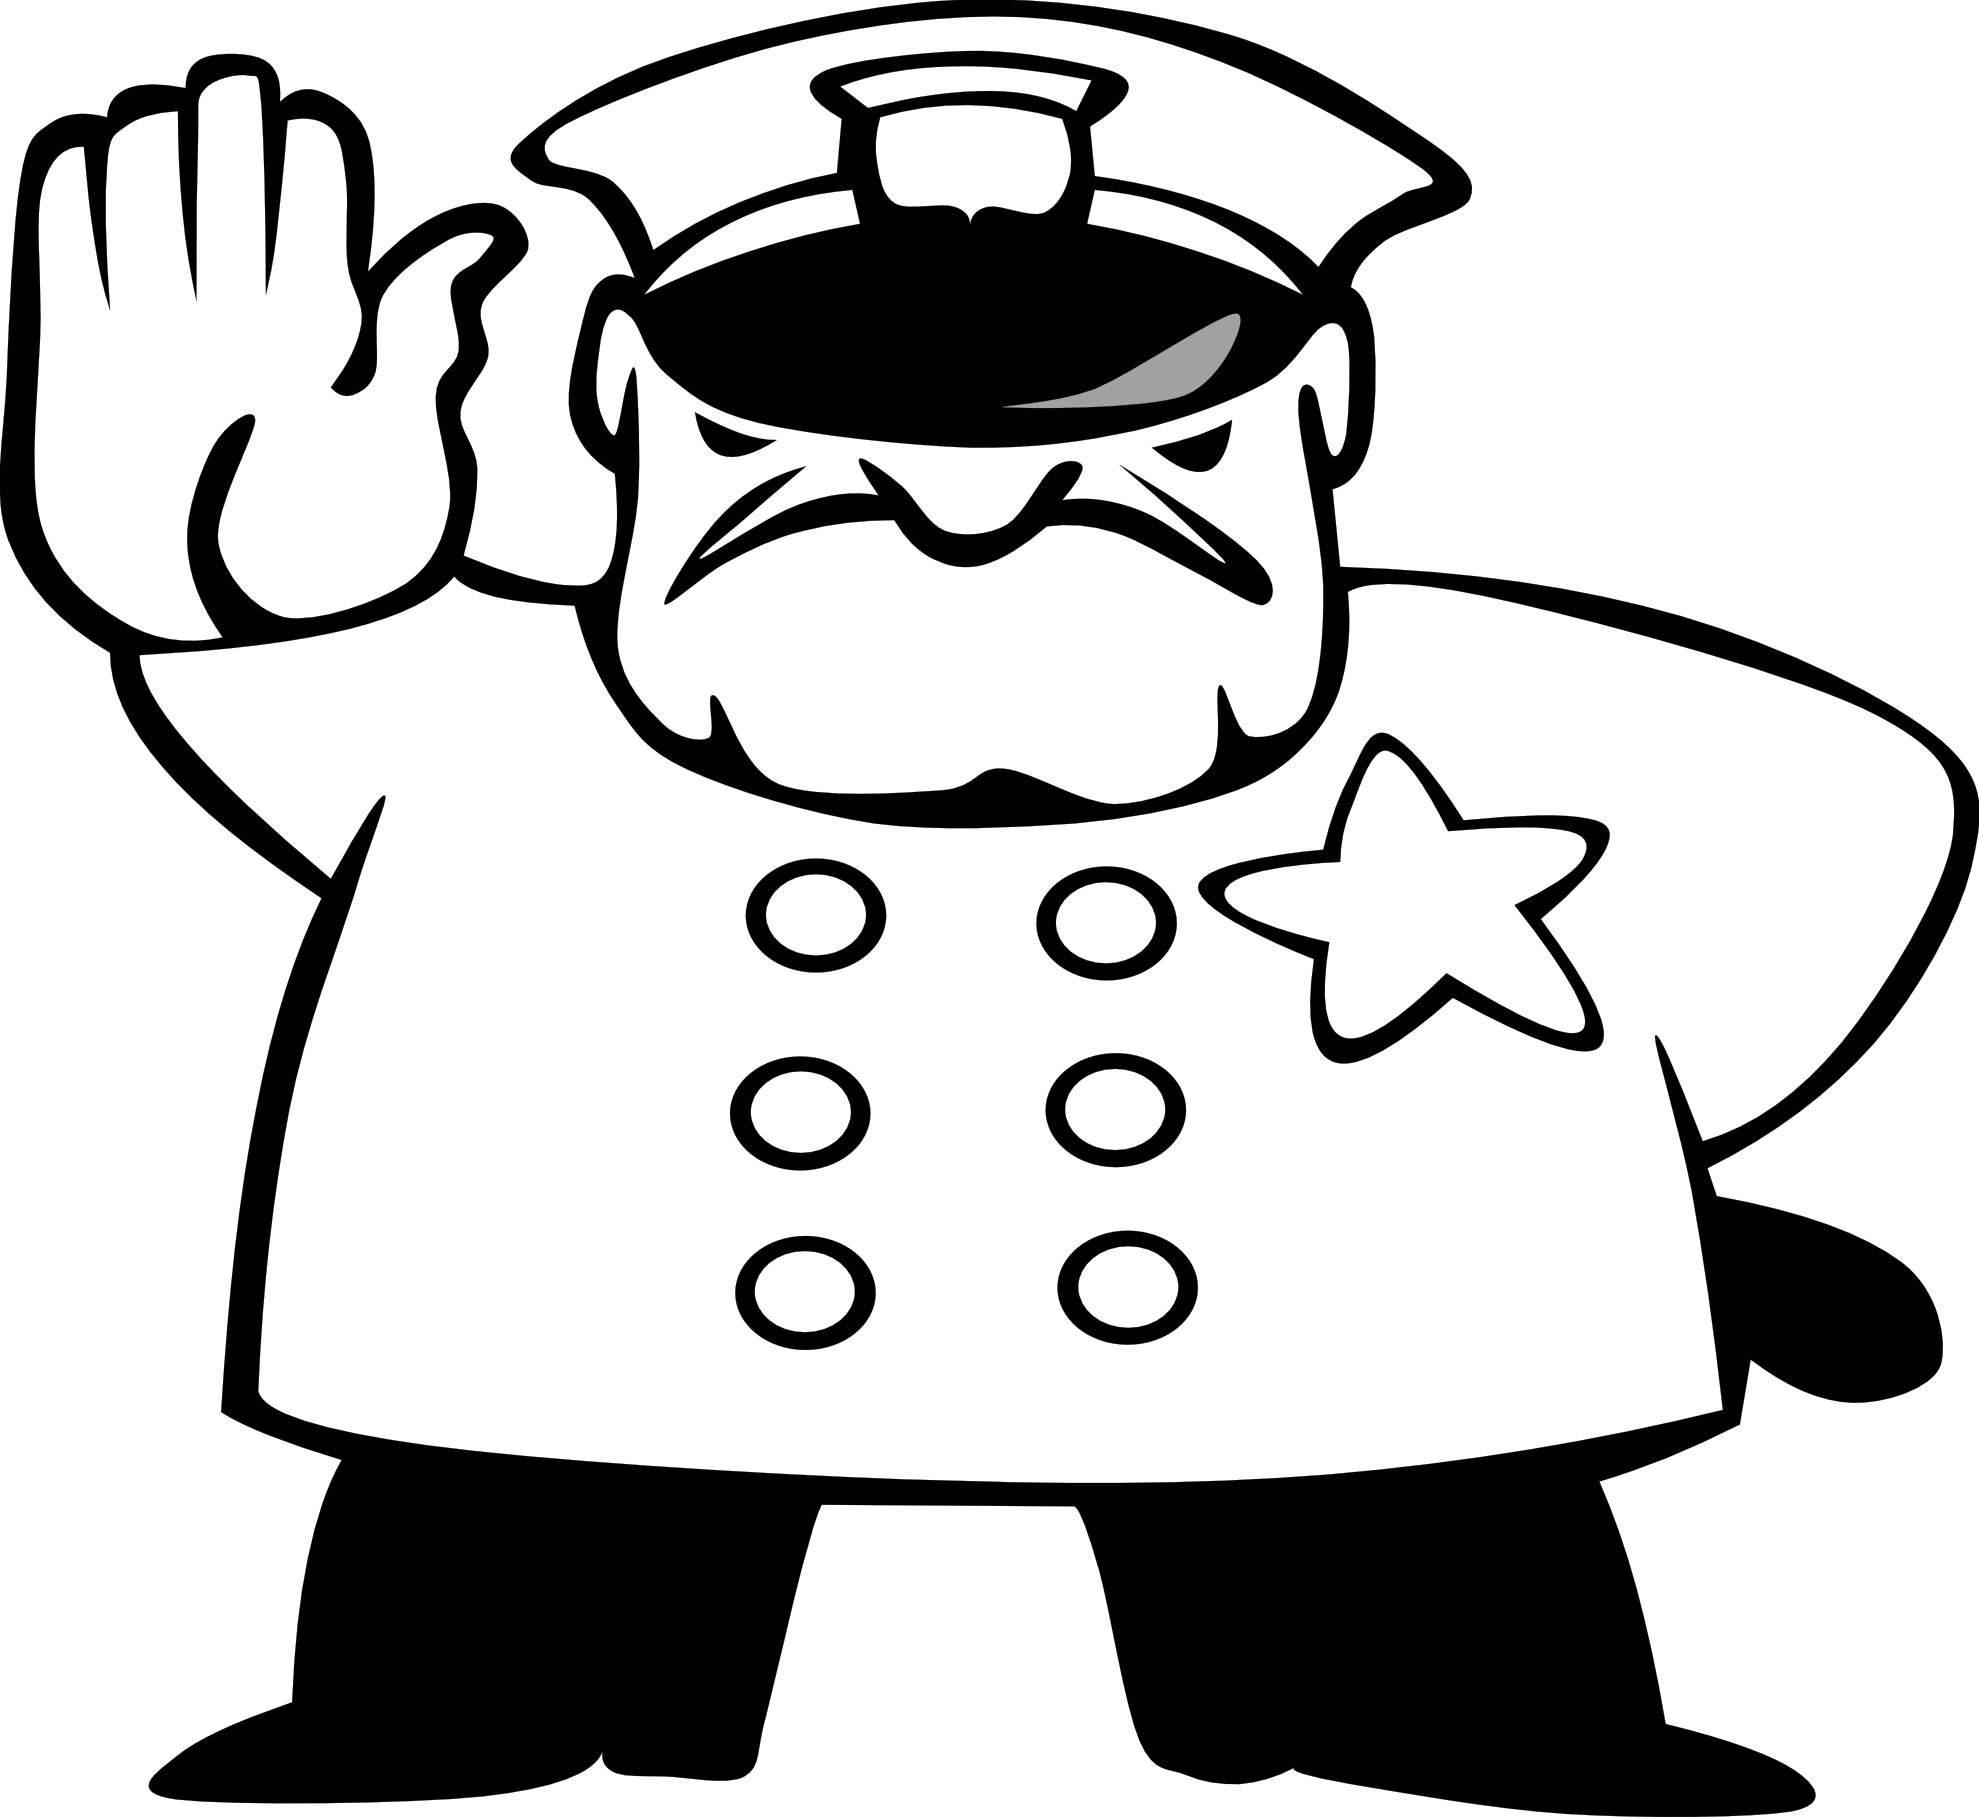 Indian clipart constable. Free police man pictures